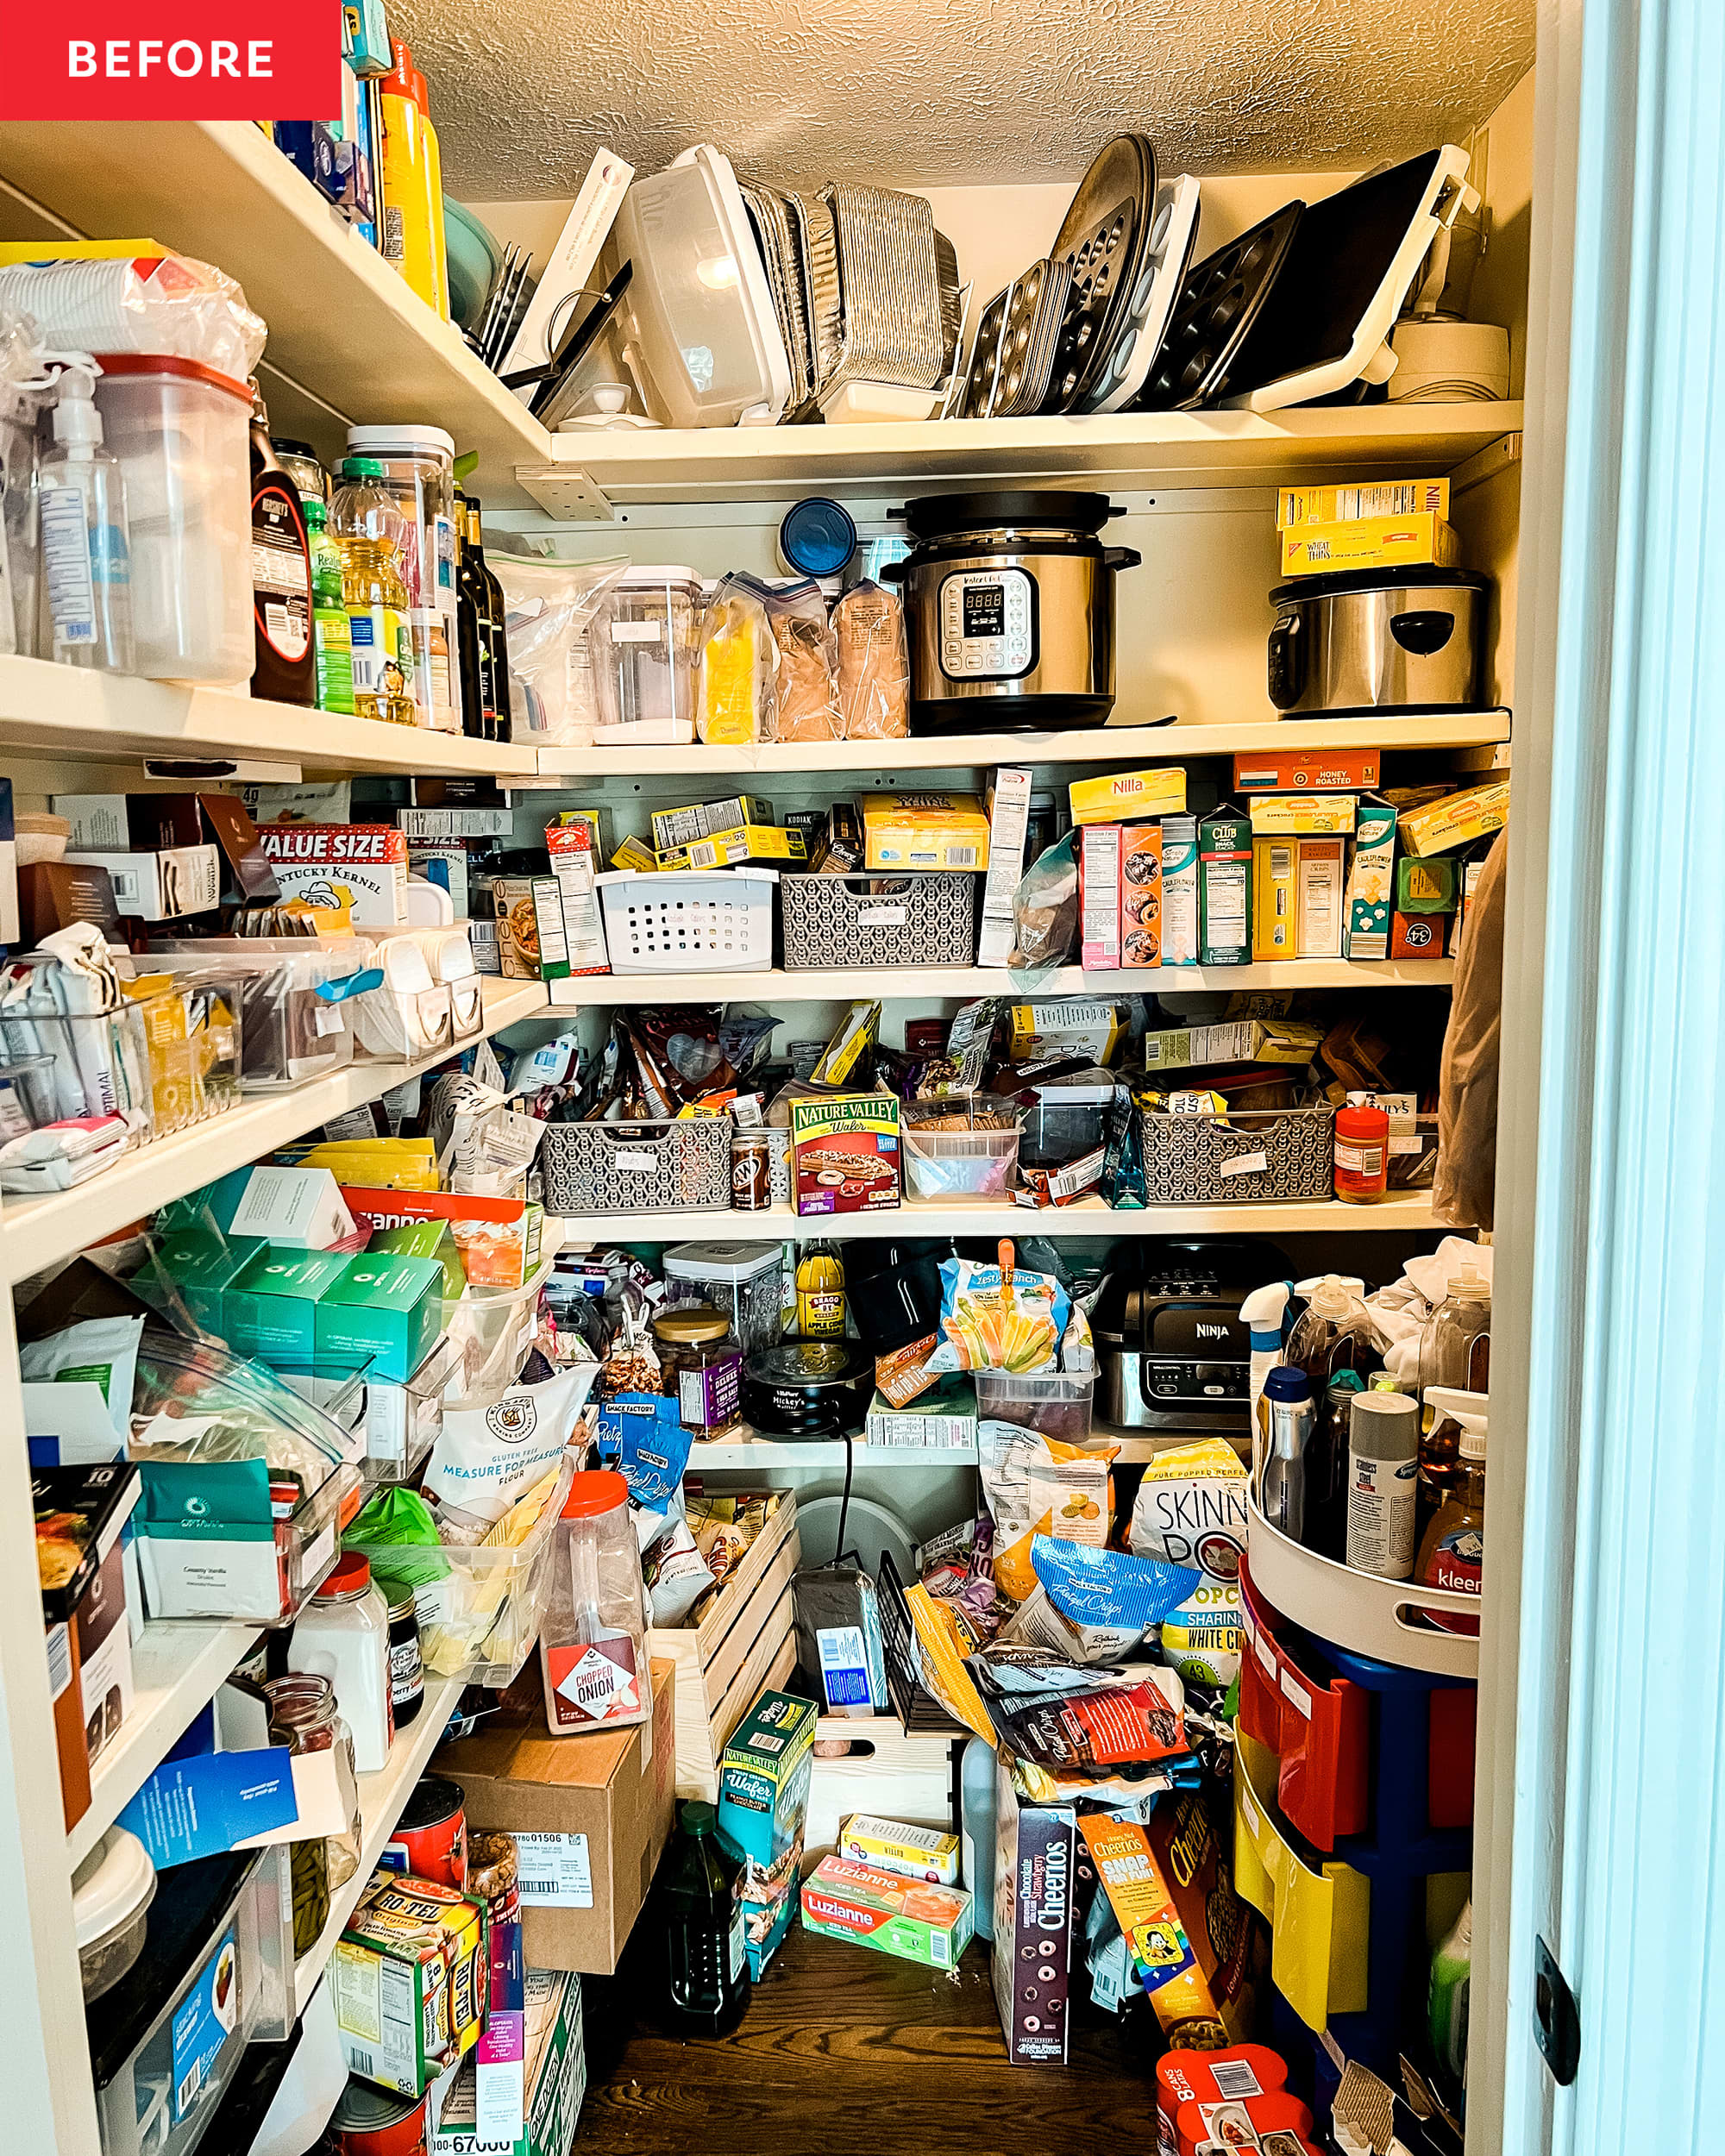 https://cdn.apartmenttherapy.info/image/upload/v1670980852/at/organize-clean/before-after/Kristol_Yeager_Client_Pantry%20/KristolYeager_before.jpg